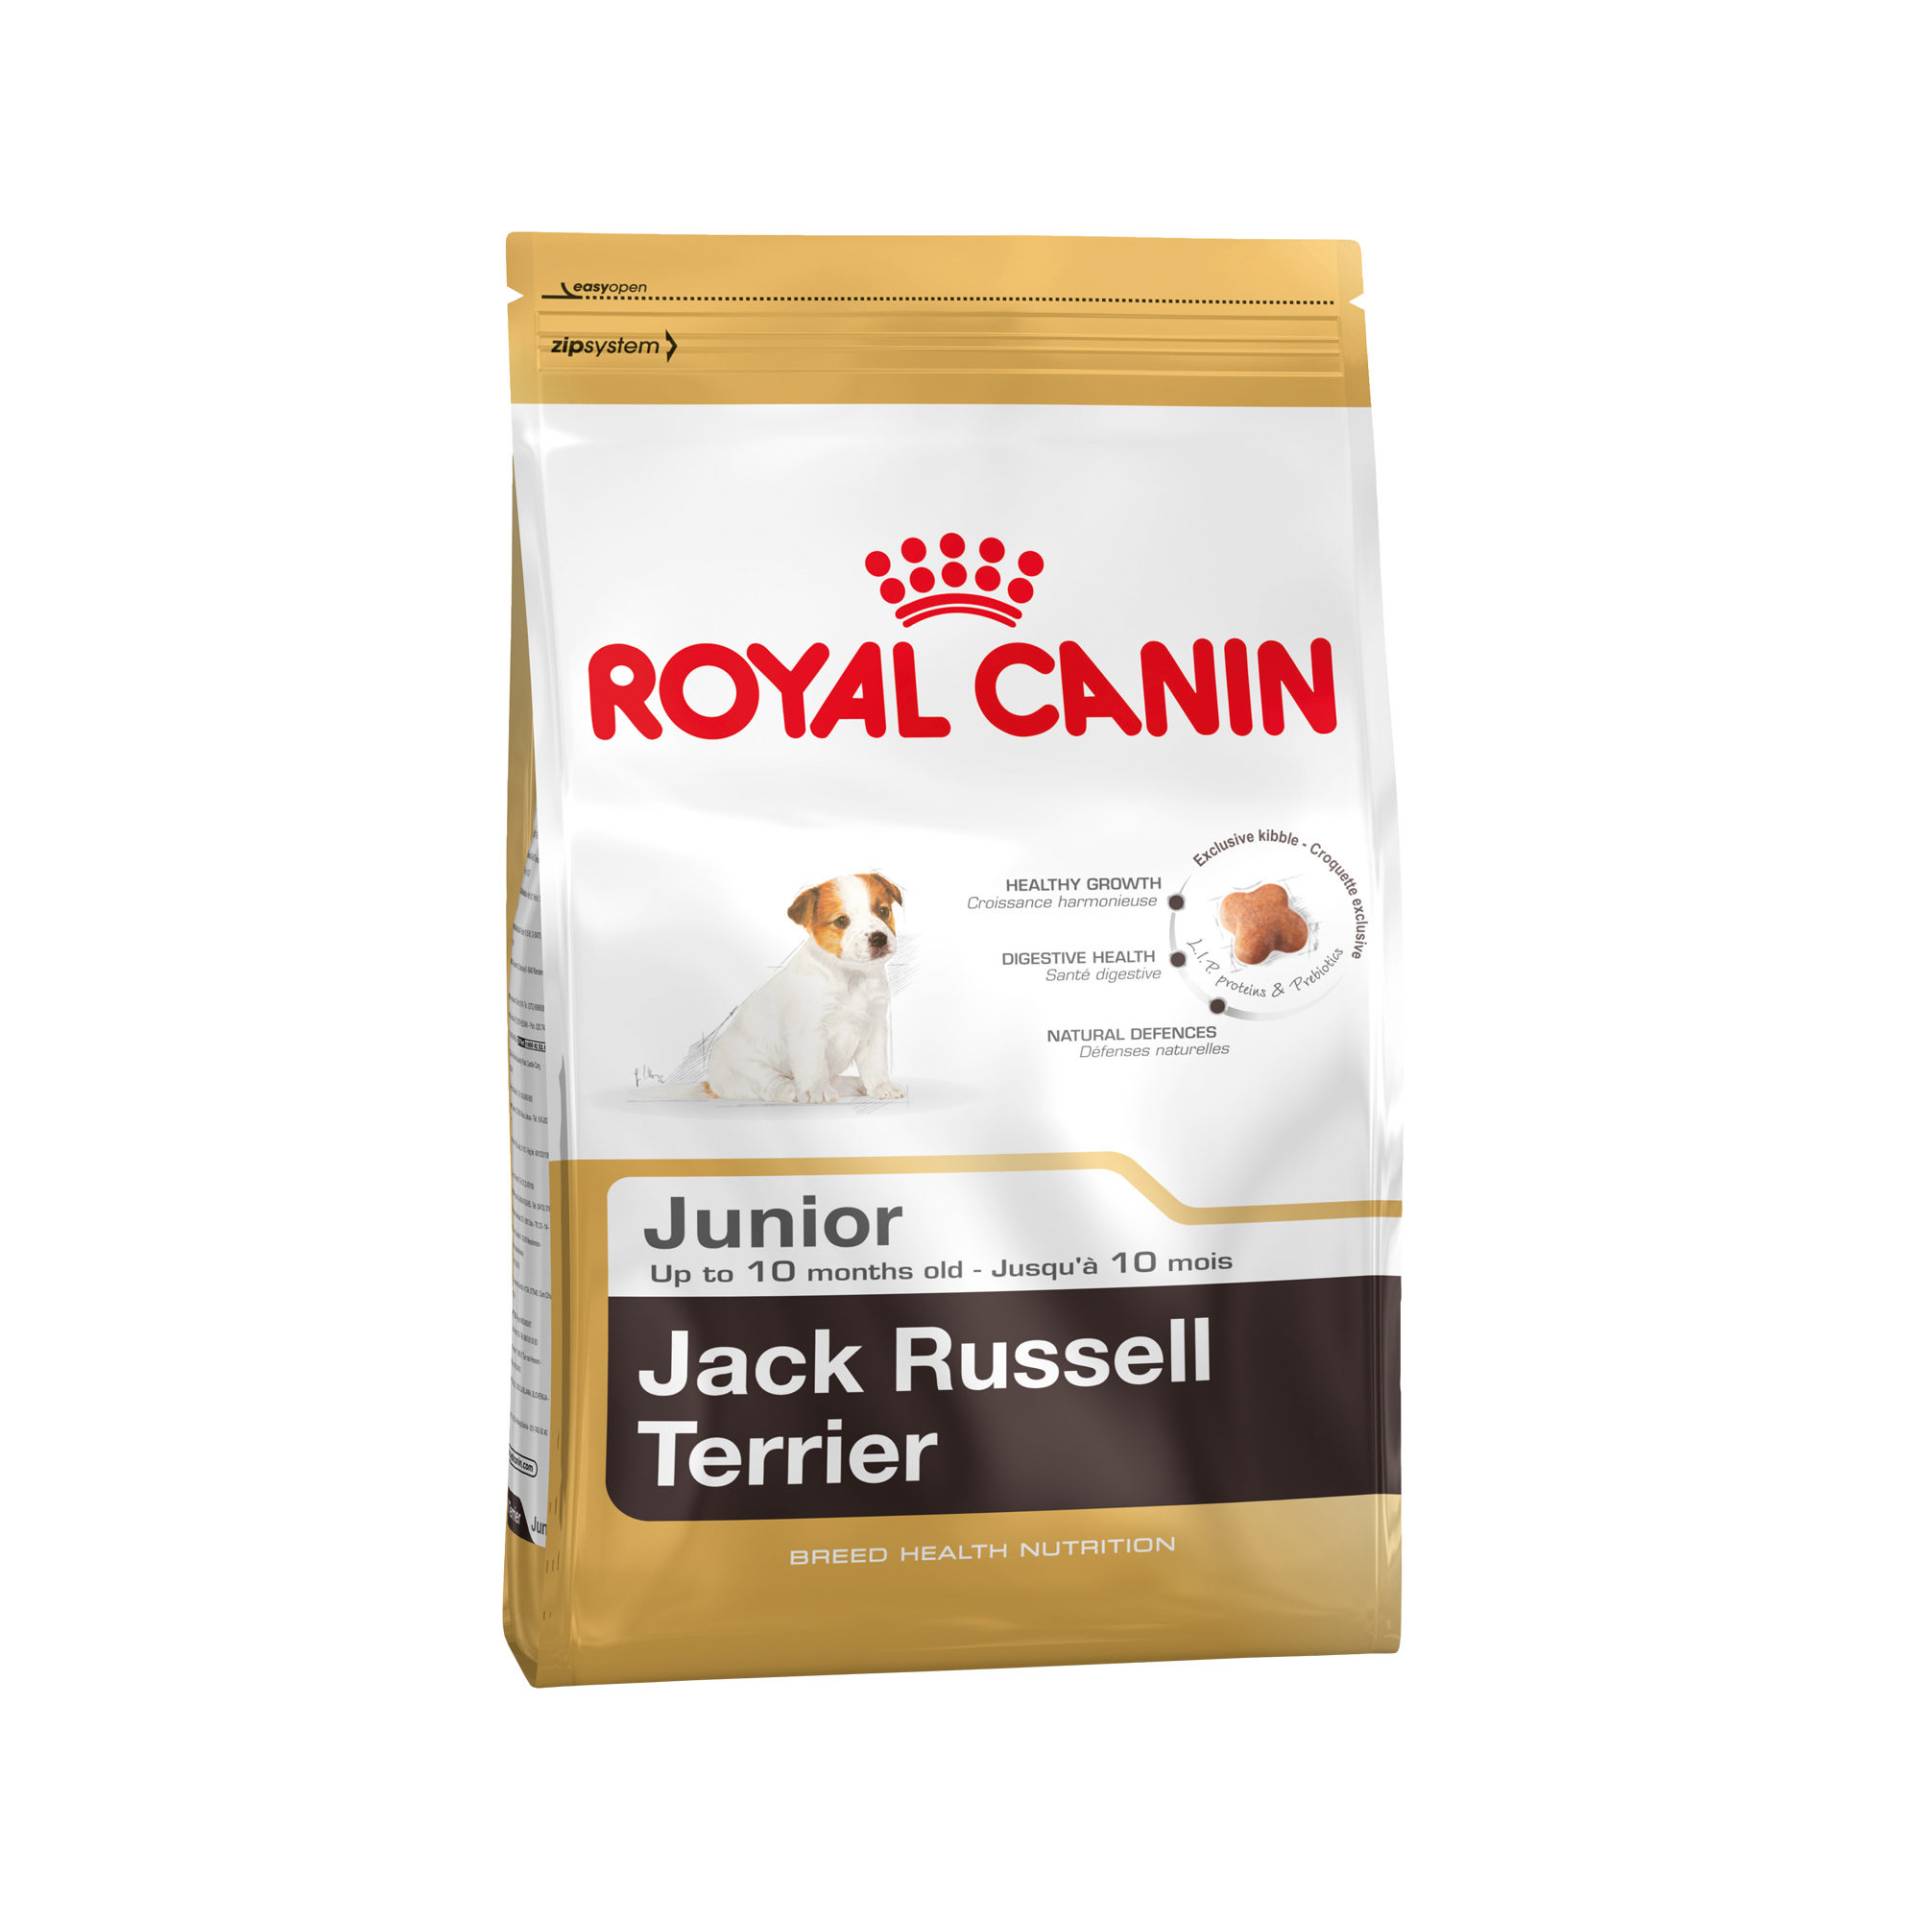 Royal Canin Jack Russell Terrier Puppy Hundefutter - 1,5 kg von Royal Canin